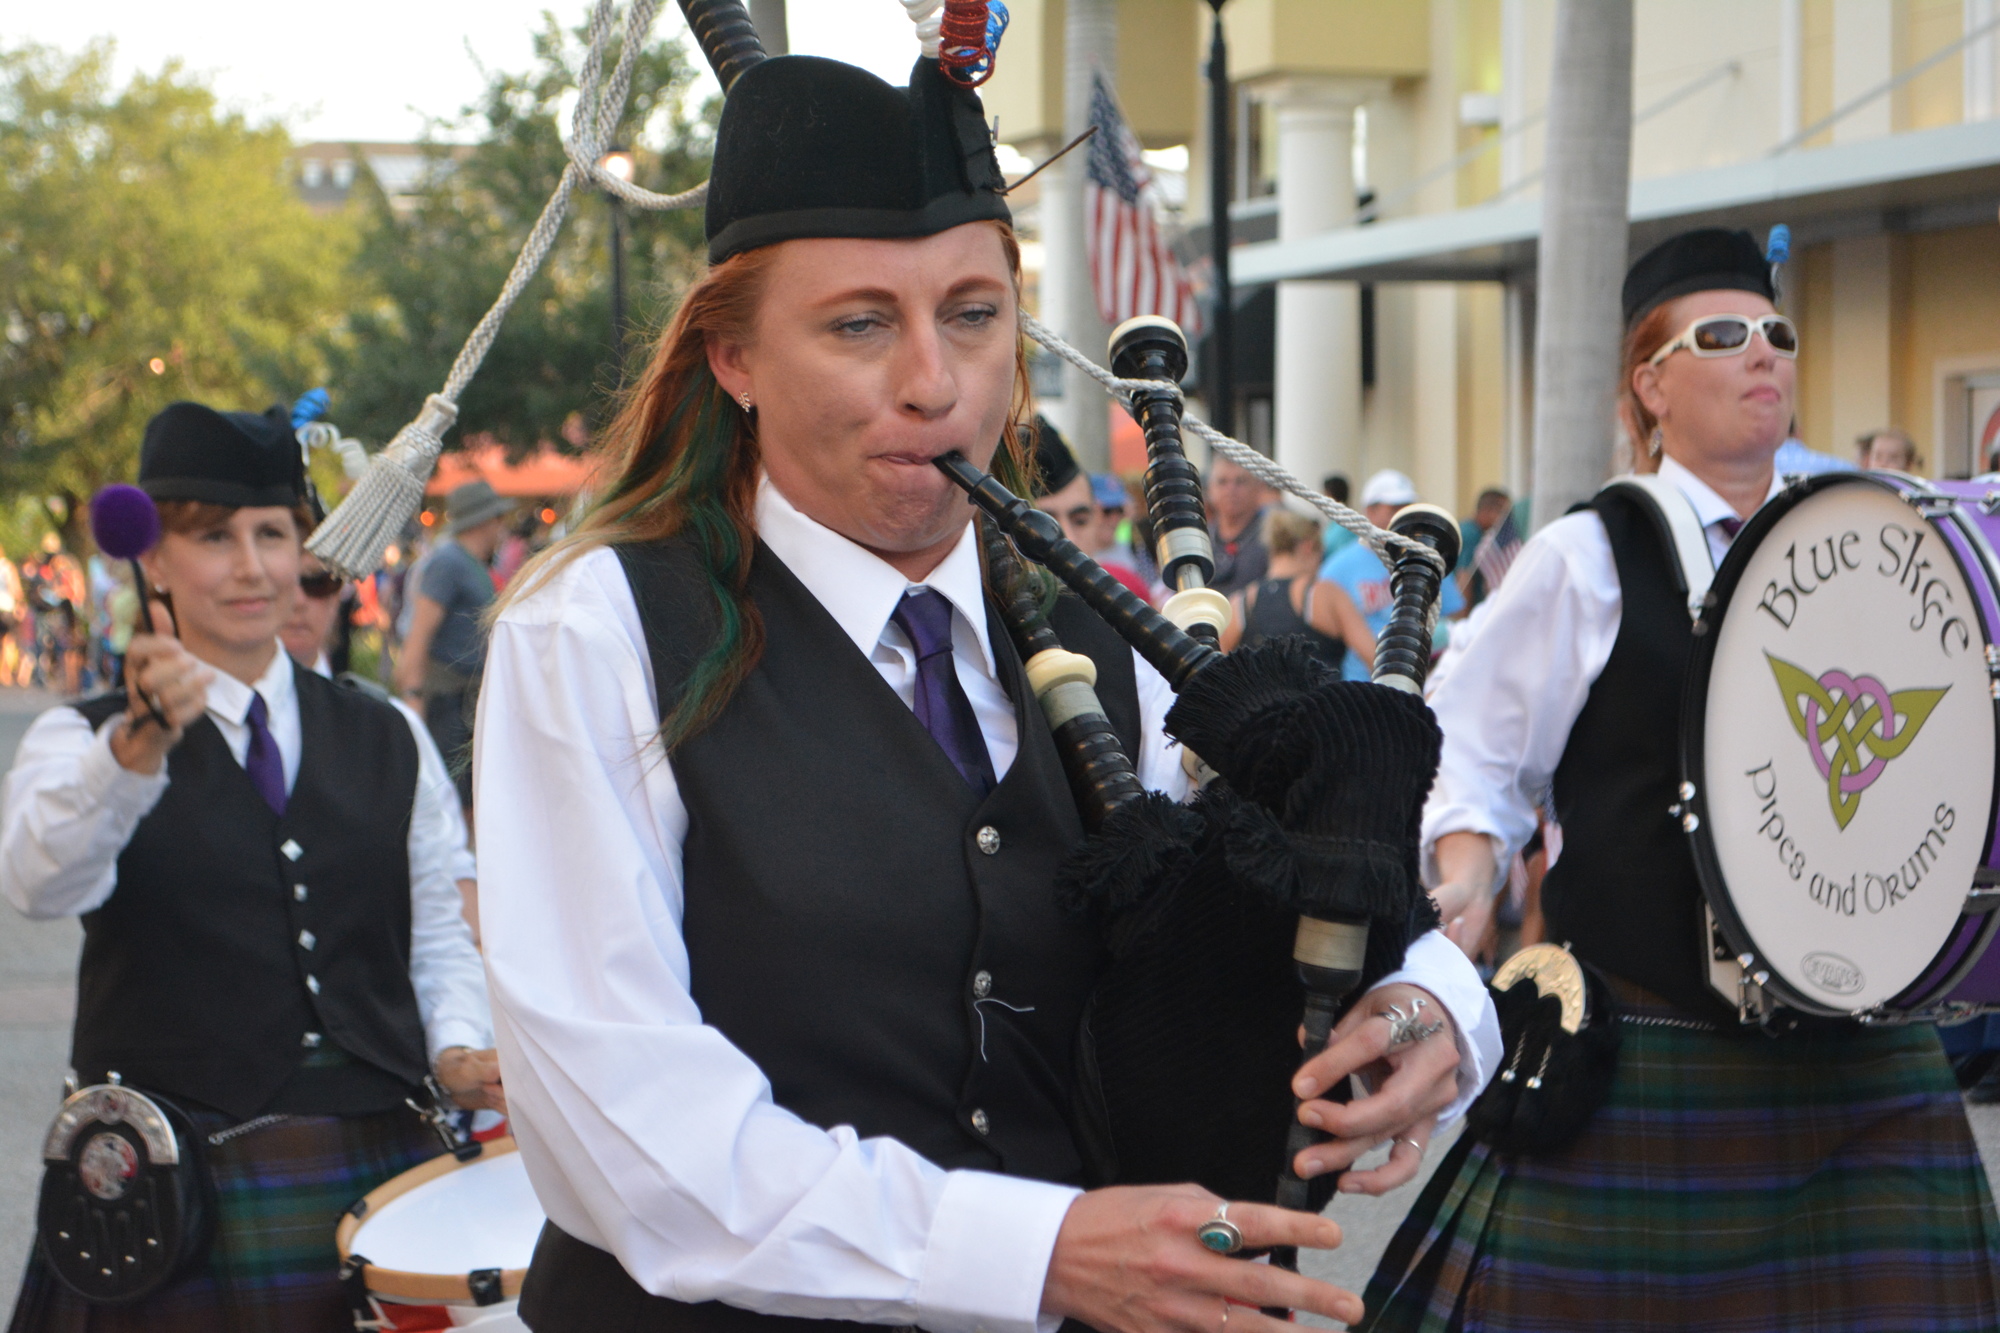 Courtney Calo of Sarasota kept the music flowing as a member of Blue Skye Pipes and Drum during the 2017 Tribute to Heroes Parade.